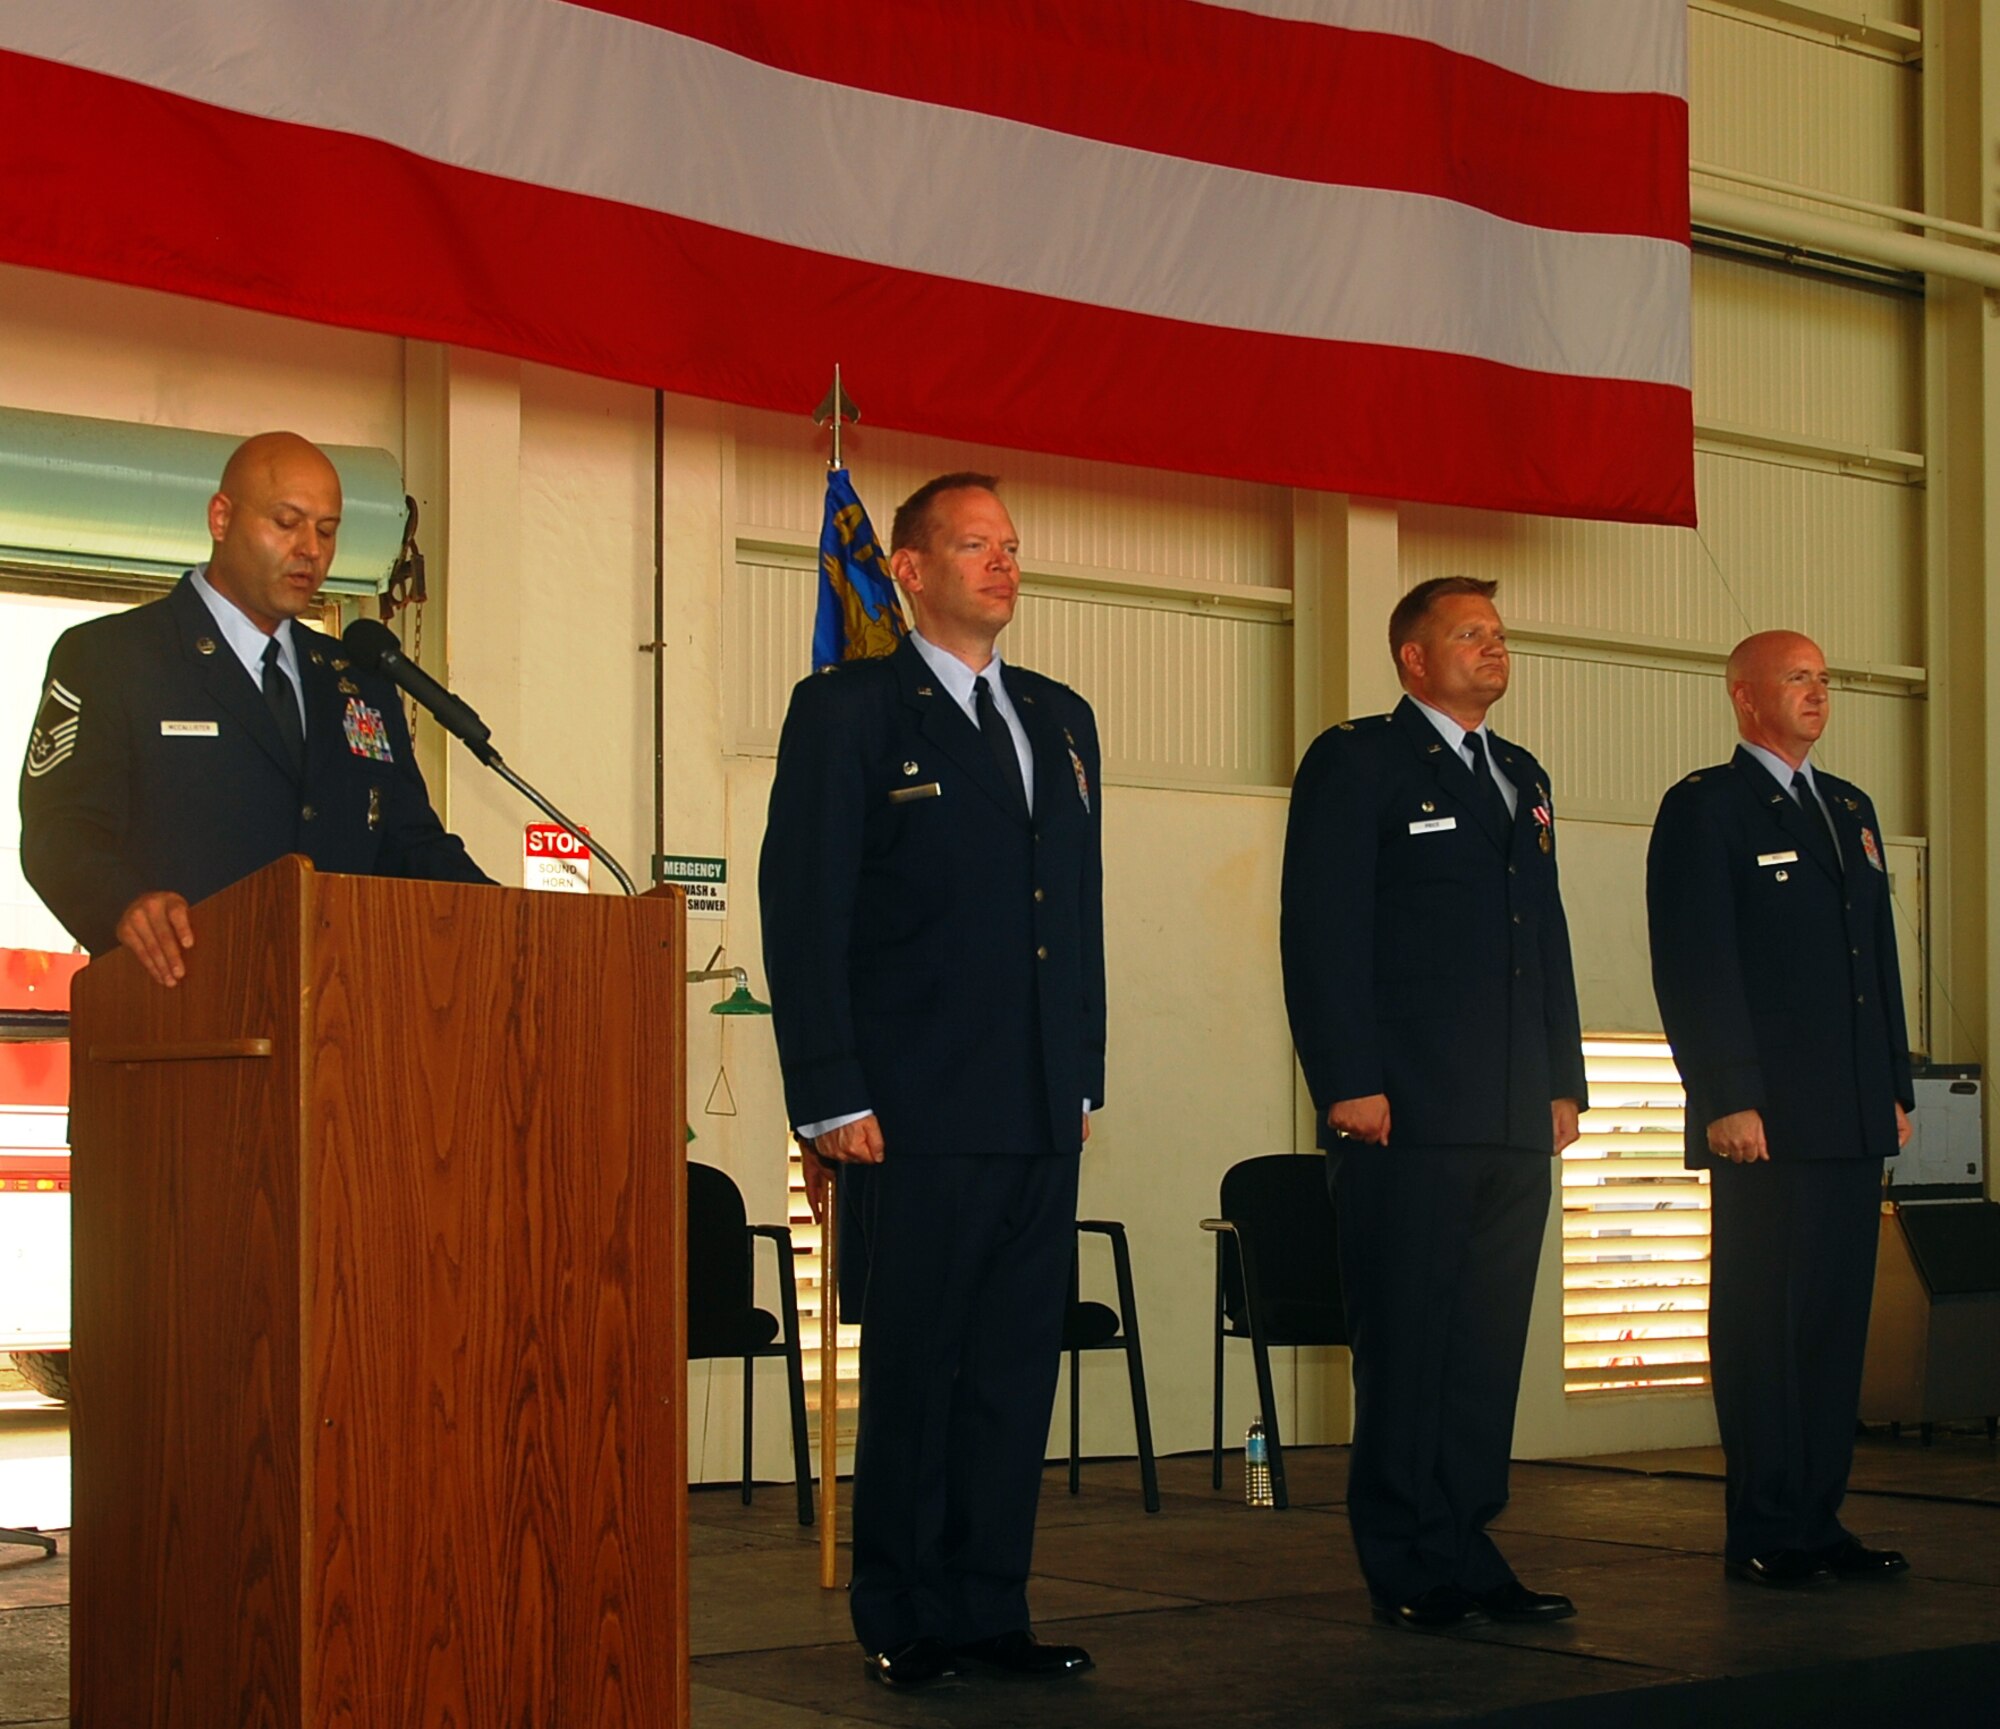 Senior Master Sgt. Benson McCallister, 429th Expeditionary Operations Squadron (EOS) Superintendent, narrates during the Change of Command ceremony while the official party, Col. WM Bruce Danskine, 474th Air Expeditionary Group Commander, Lt. Col. Mike Price, outgoing 429th EOS Commander and Lt. Col. Brian Bell, incoming 429th EOS Commander, stand fast before the changing of the guidon.  (Courtesy photo)